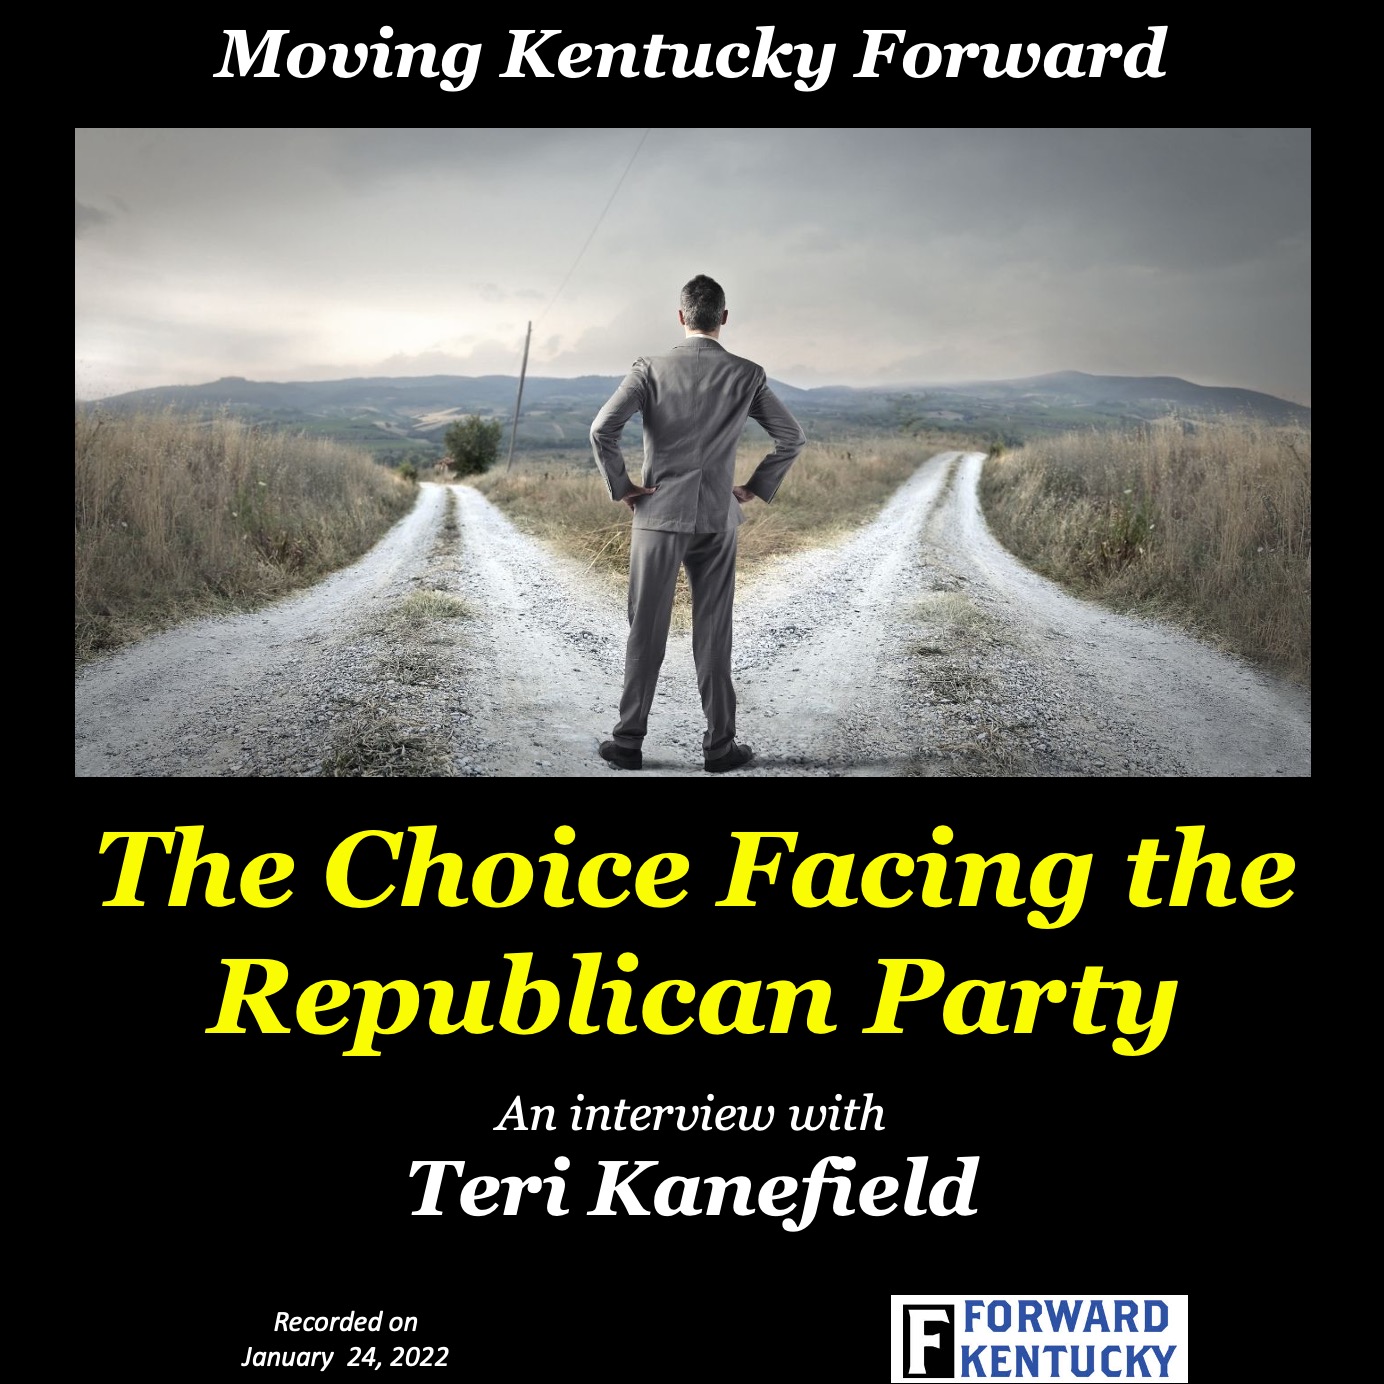 The Choice Facing the Republican Party